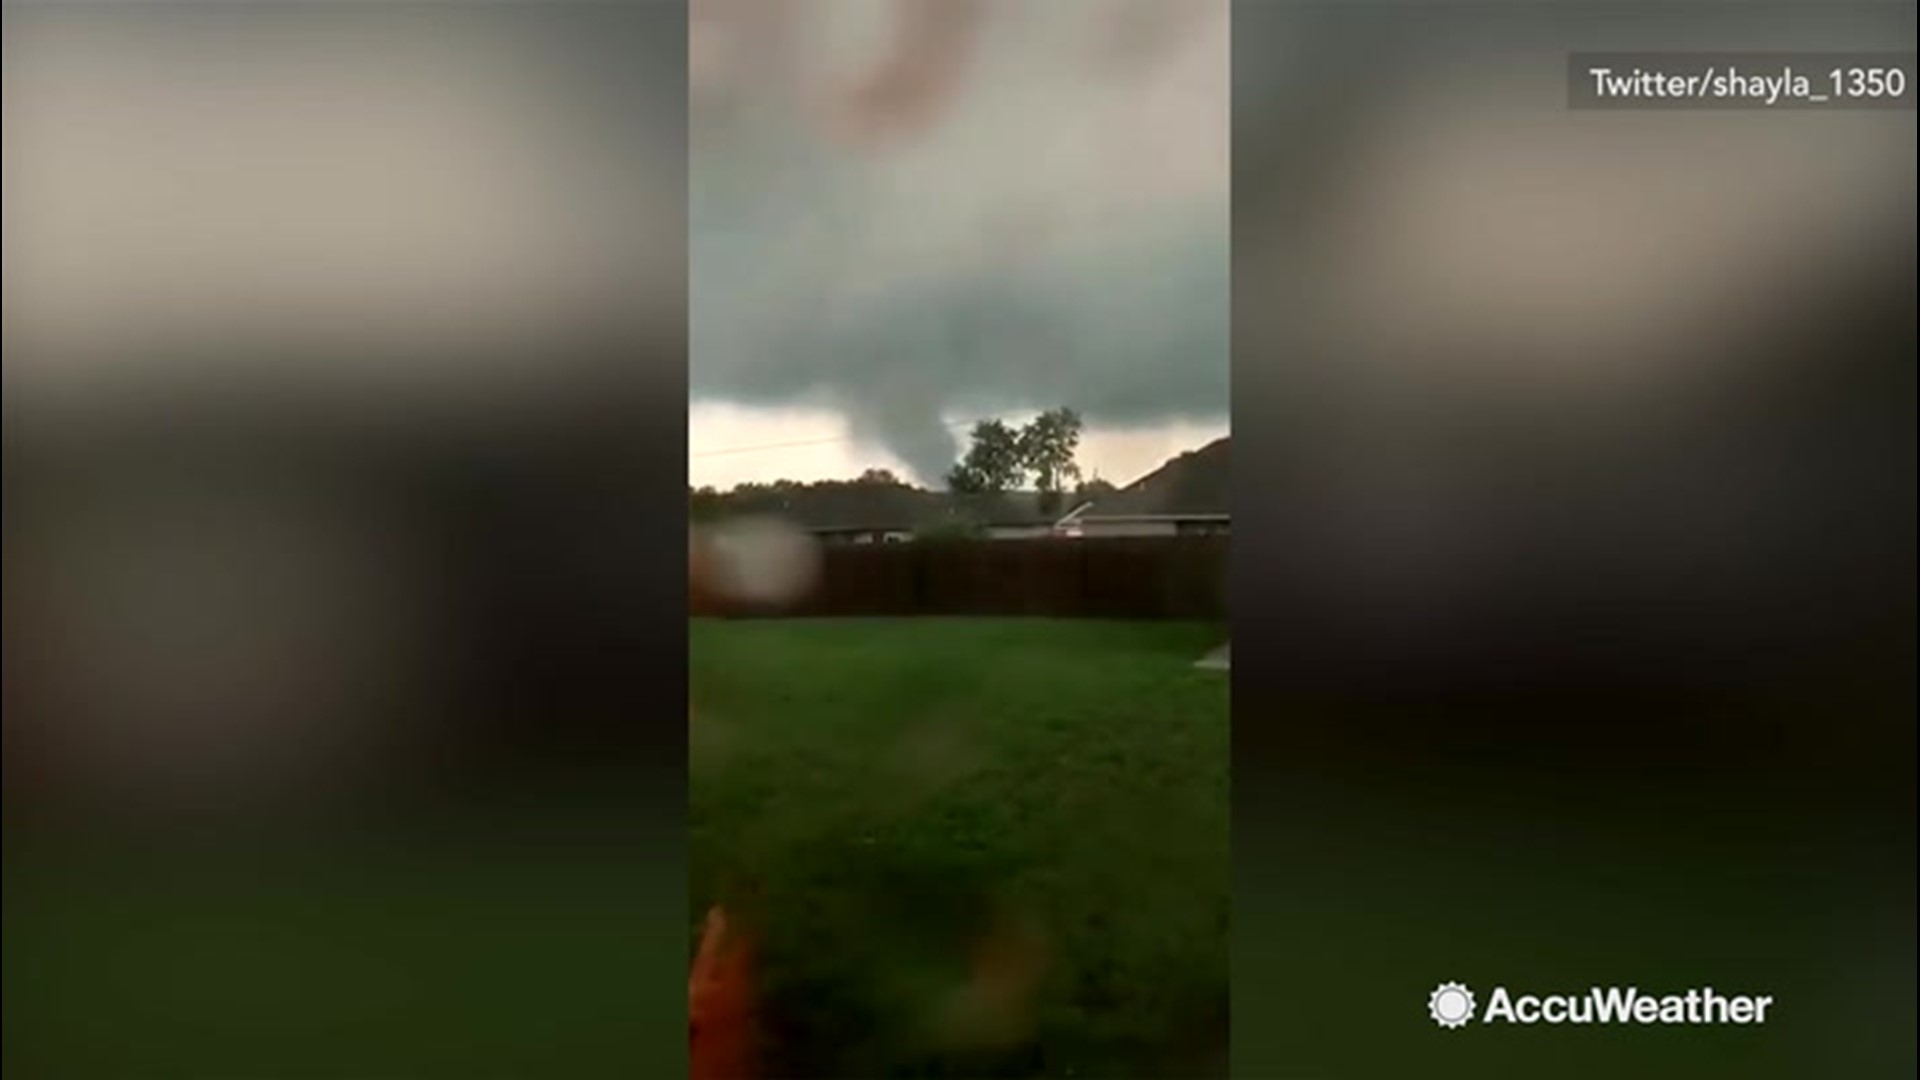 A tornado was visible from many resident's backyards in Joplin, Missouri, the evening of May 22.